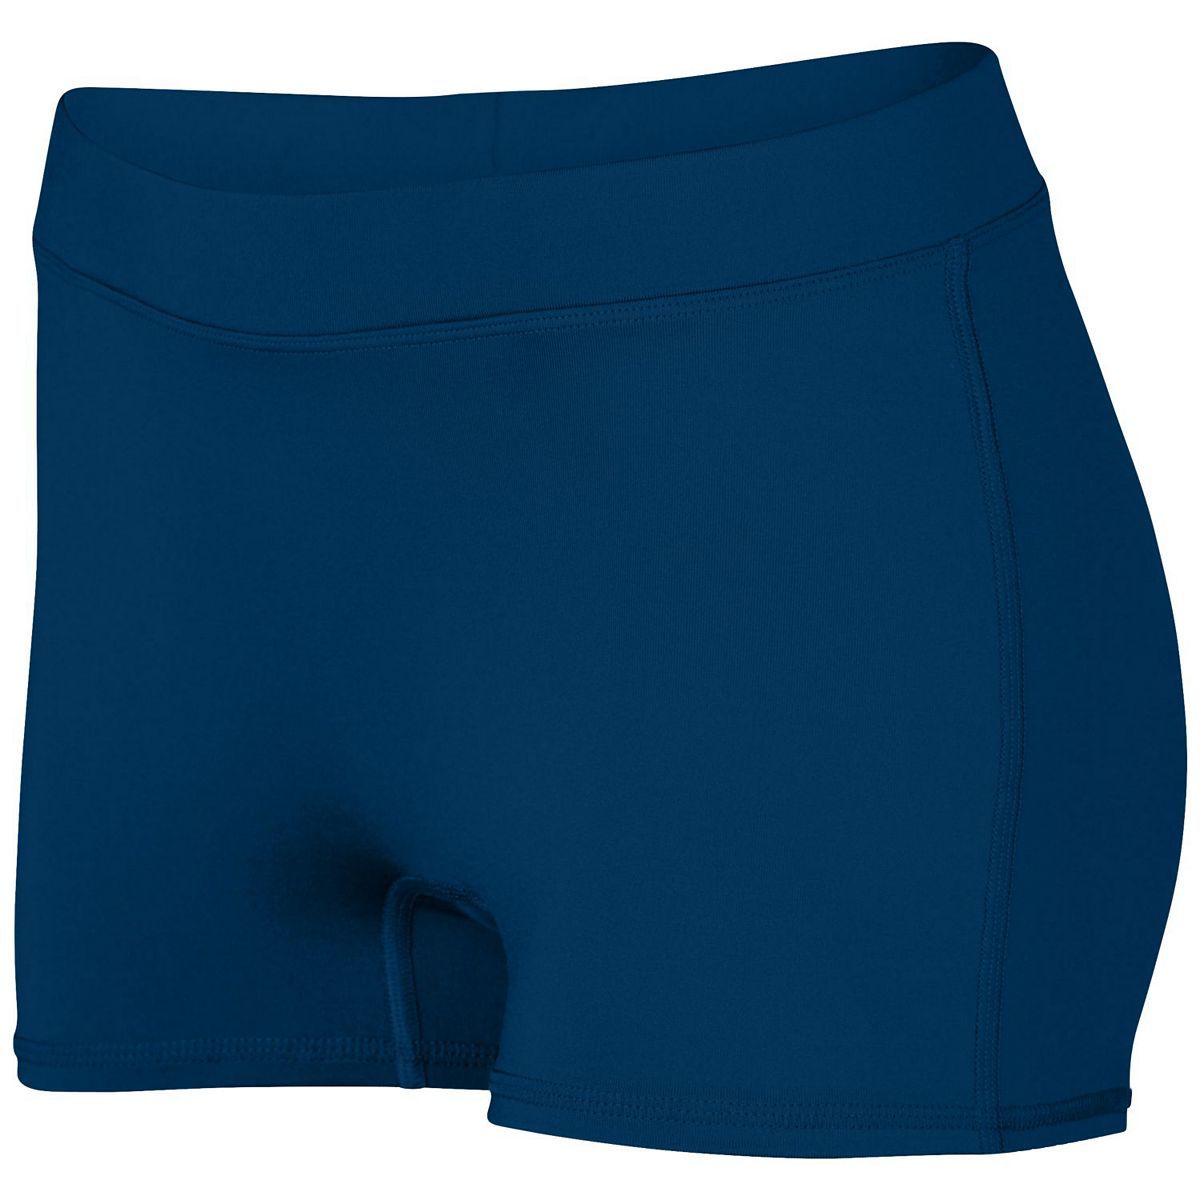 Augusta Sportswear Girls Dare Shorts in Navy  -Part of the Girls, Augusta-Products, Volleyball, Girls-Shorts product lines at KanaleyCreations.com